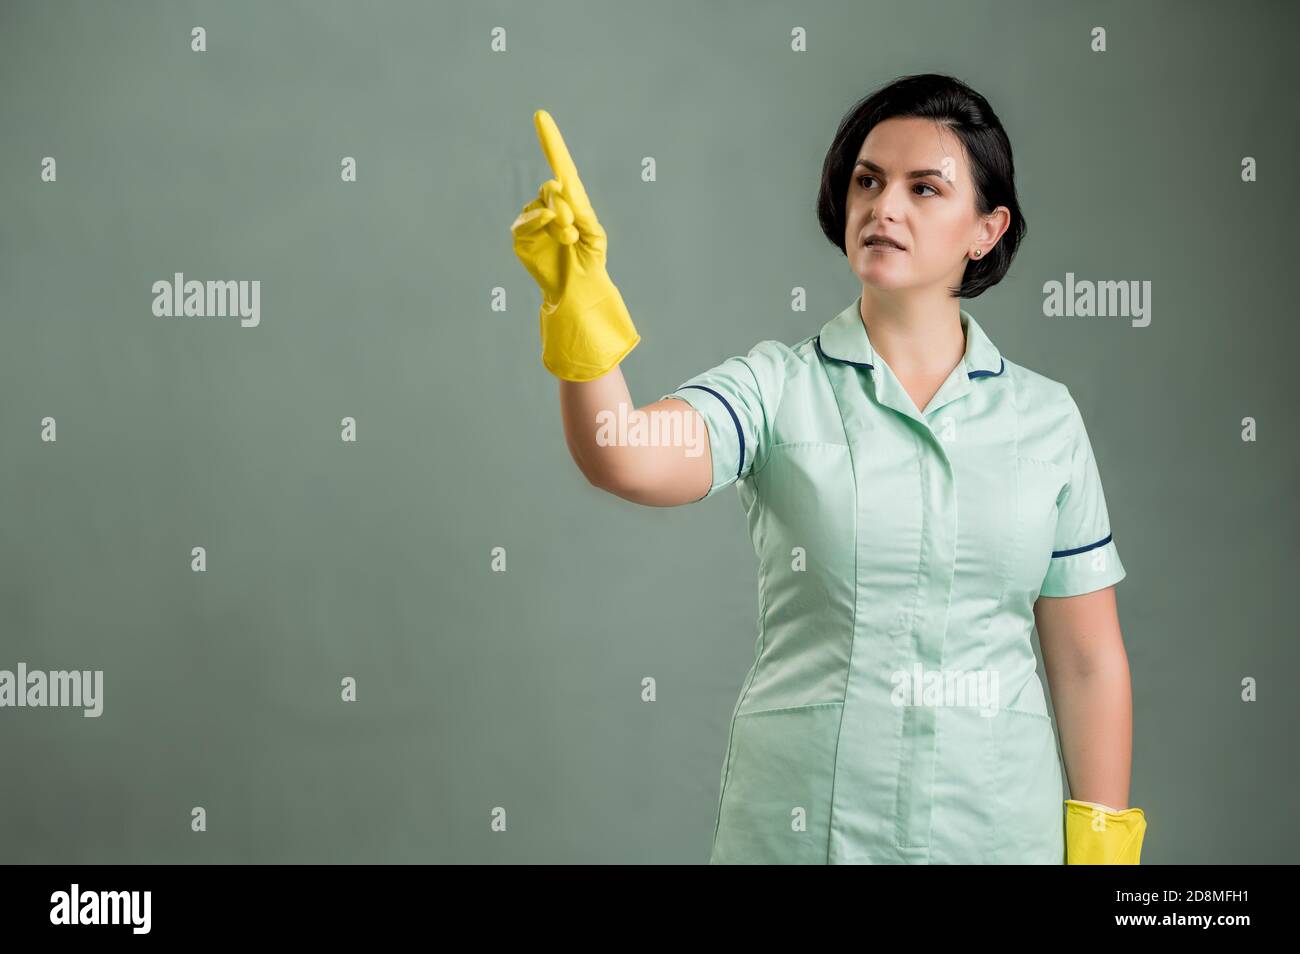 Young cleaning woman wearing a green shirt and yellow gloves, presses a virtual button isolated on green background Stock Photo